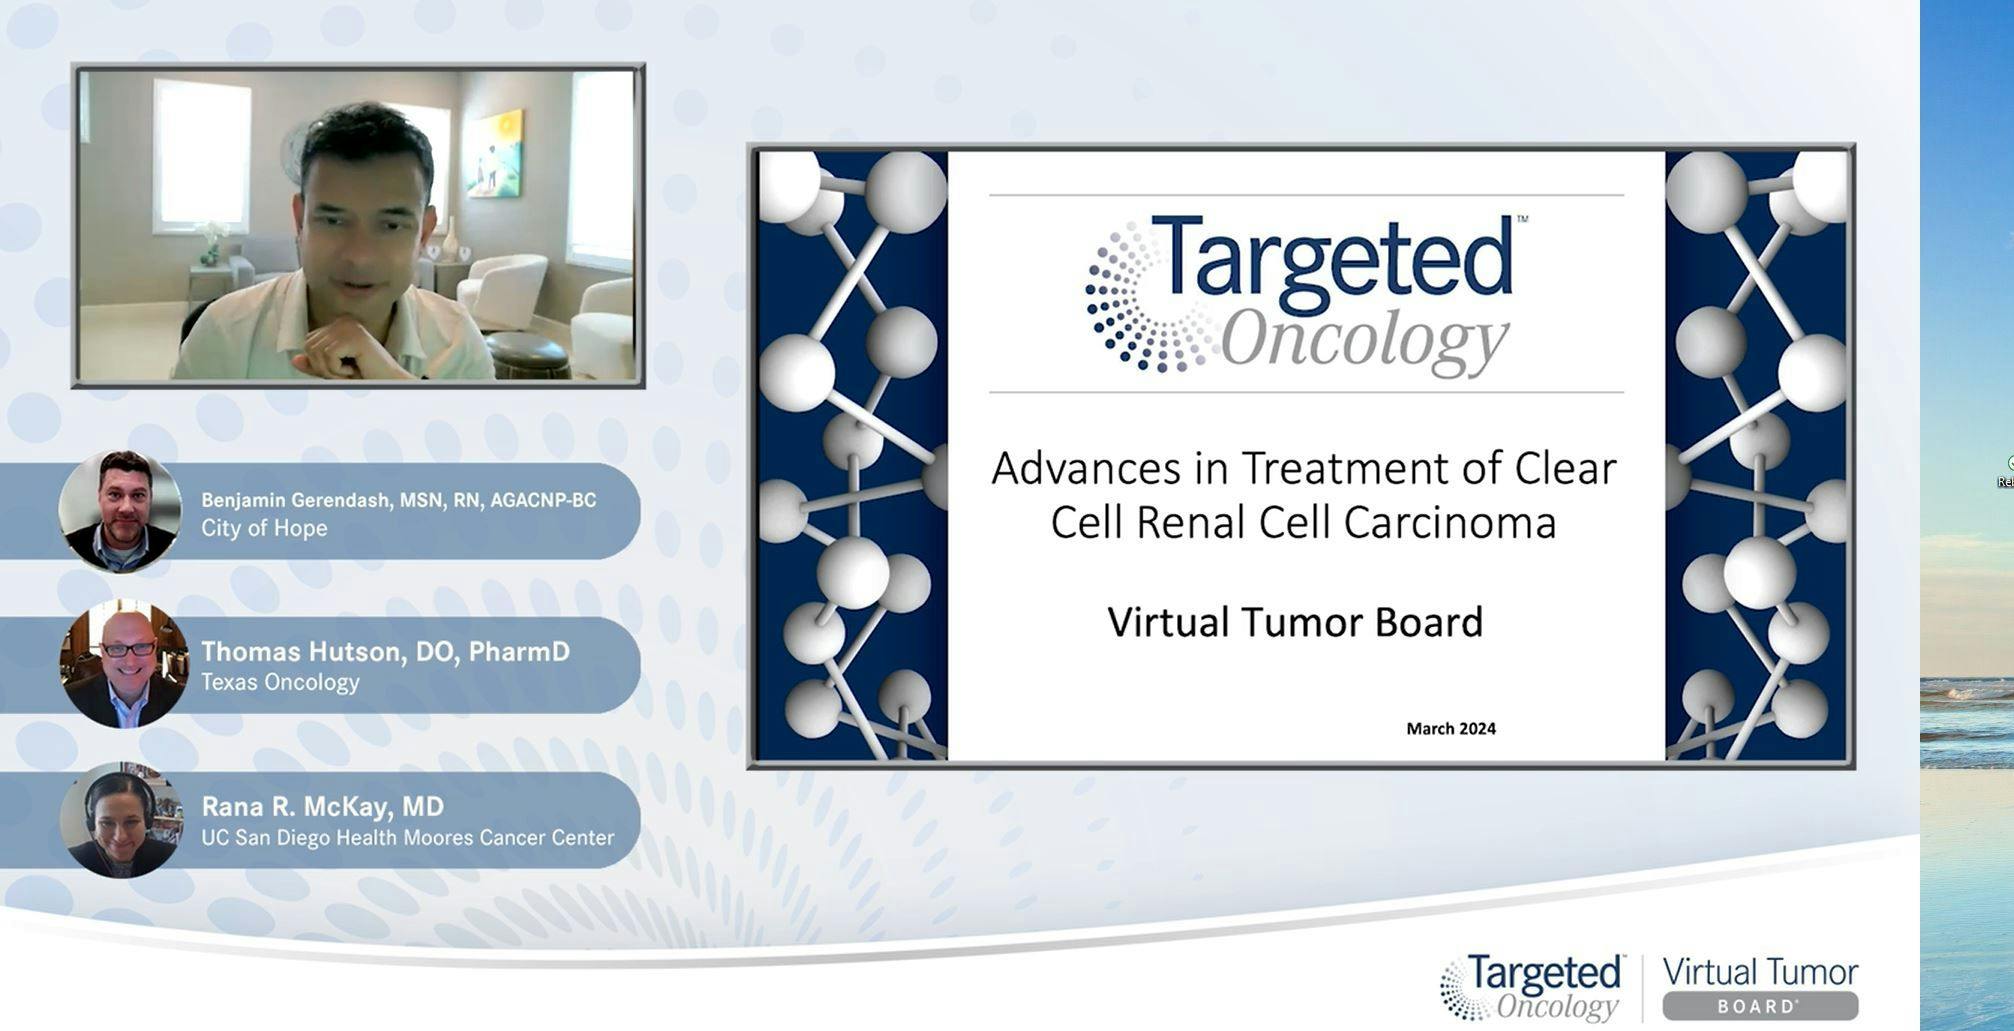 Video 8 - "Adjuvant Immunotherapy in Renal Cell Carcinoma"